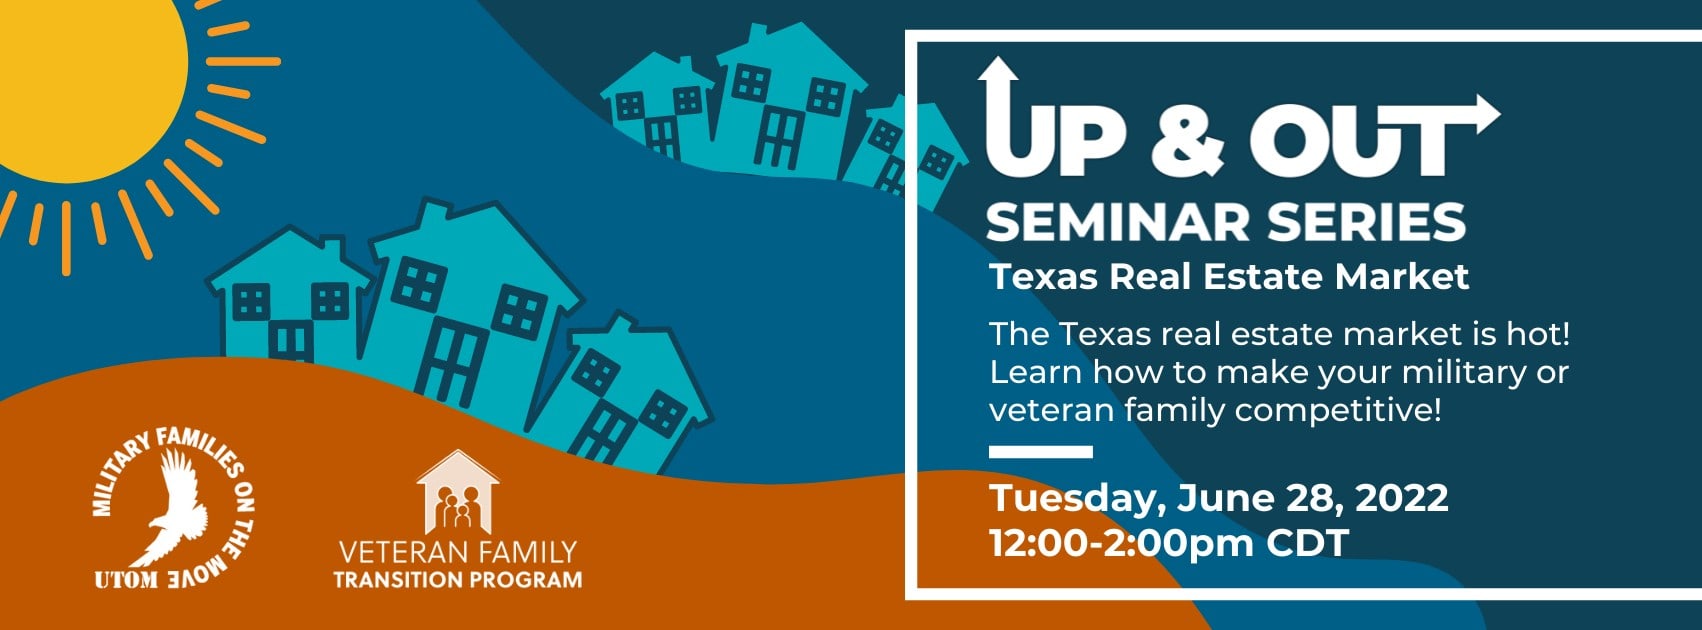 Up & Out Out Seminar Series: Texas Real Estate June 28th 12-2 CT